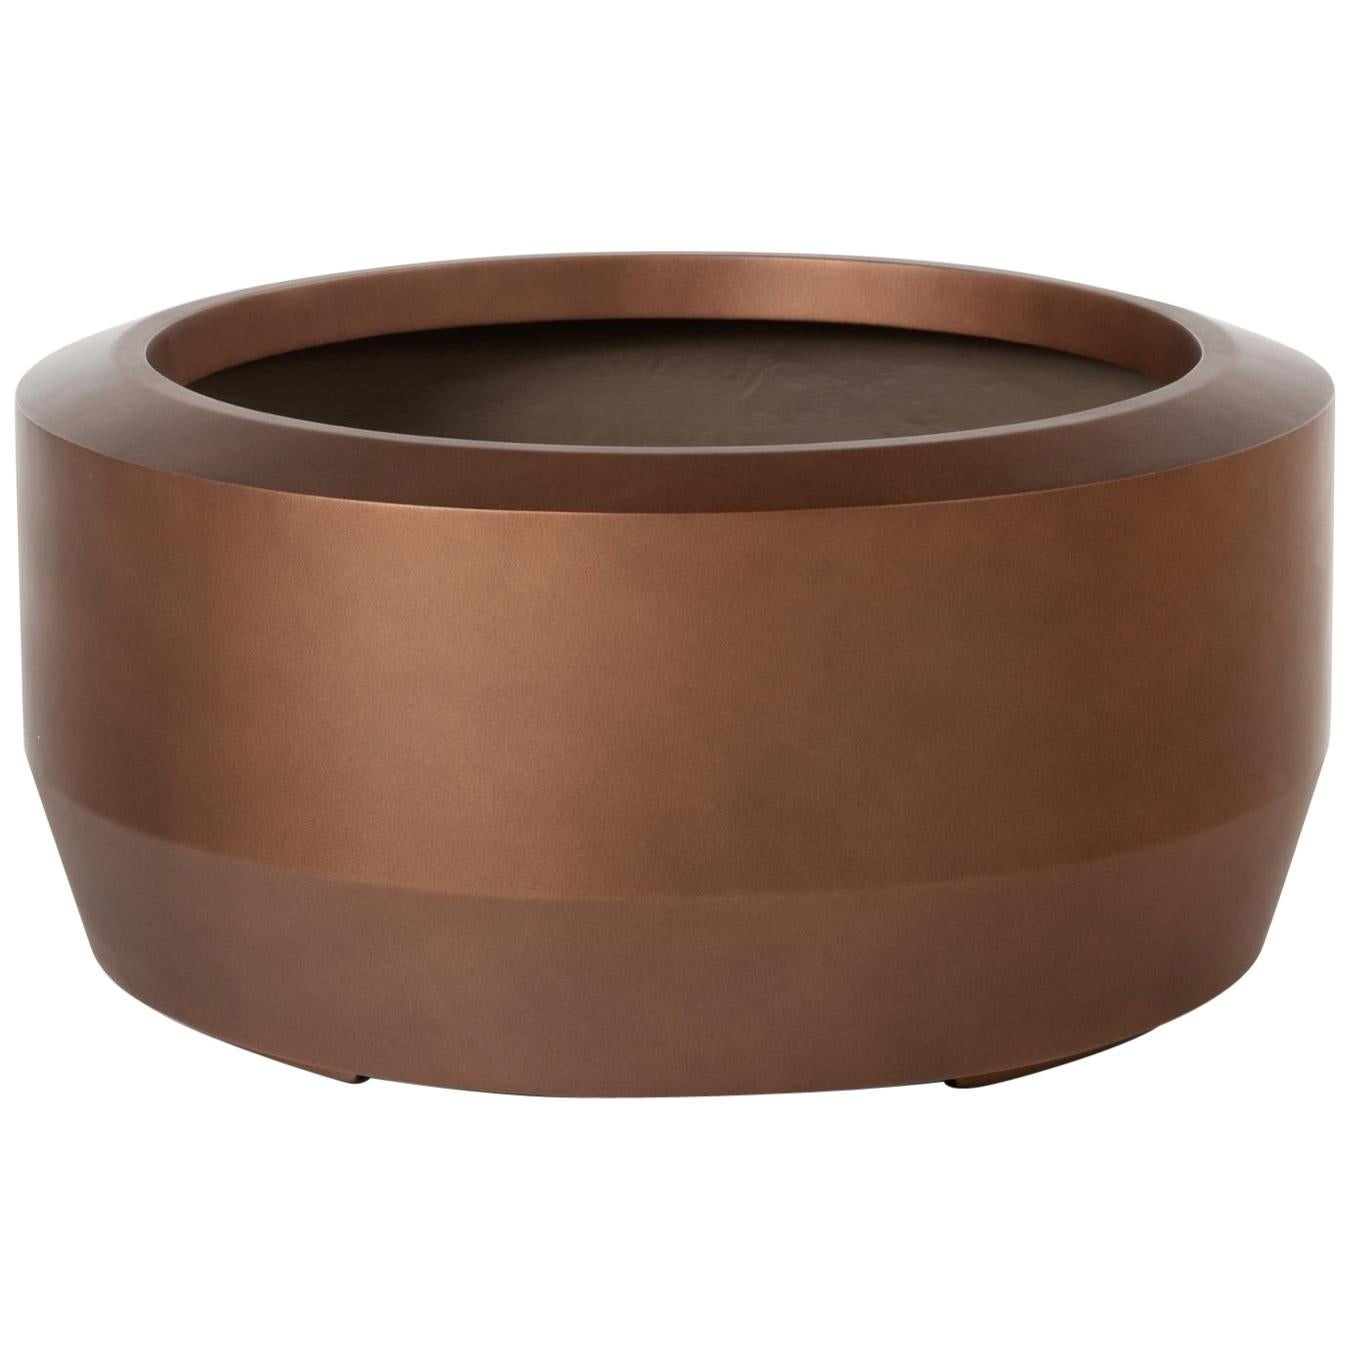 HOLLY HUNT Fugu Small Hollow Cast Concrete Outdoor Planter in Copper Finish